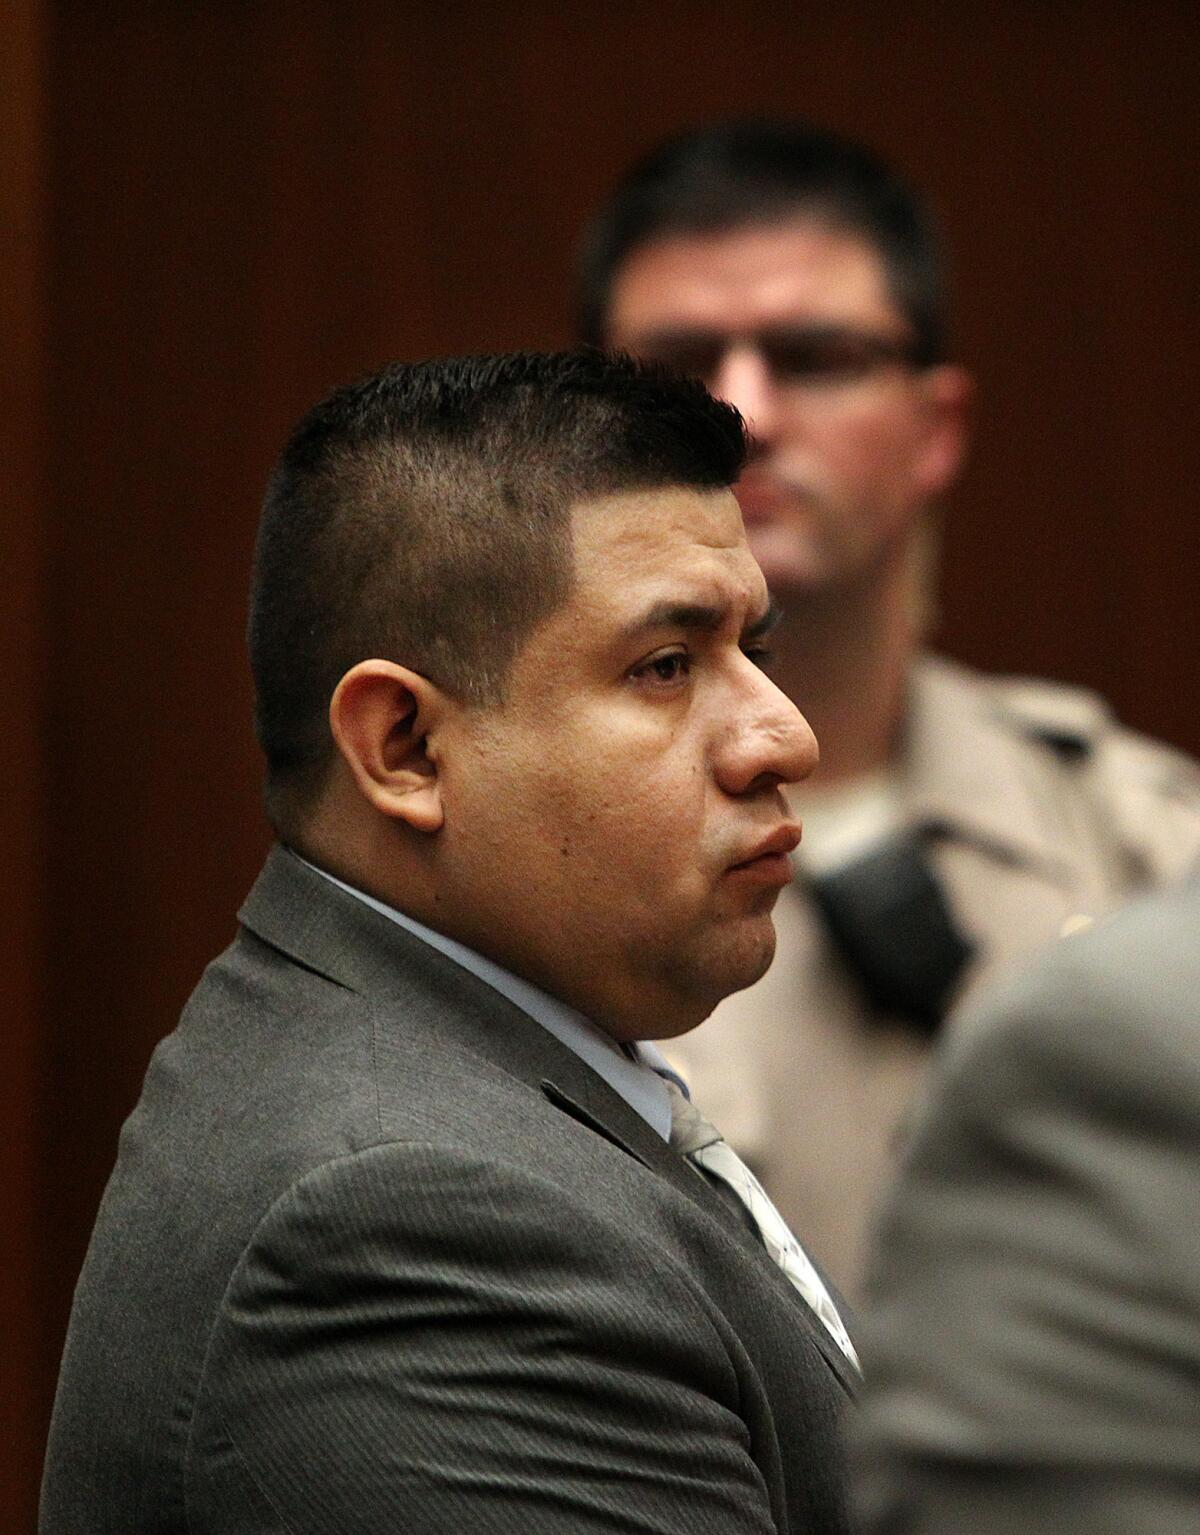 Former Los Angeles police officer Manuel Ortiz has been sentenced for charges of perjury and conspiracy.